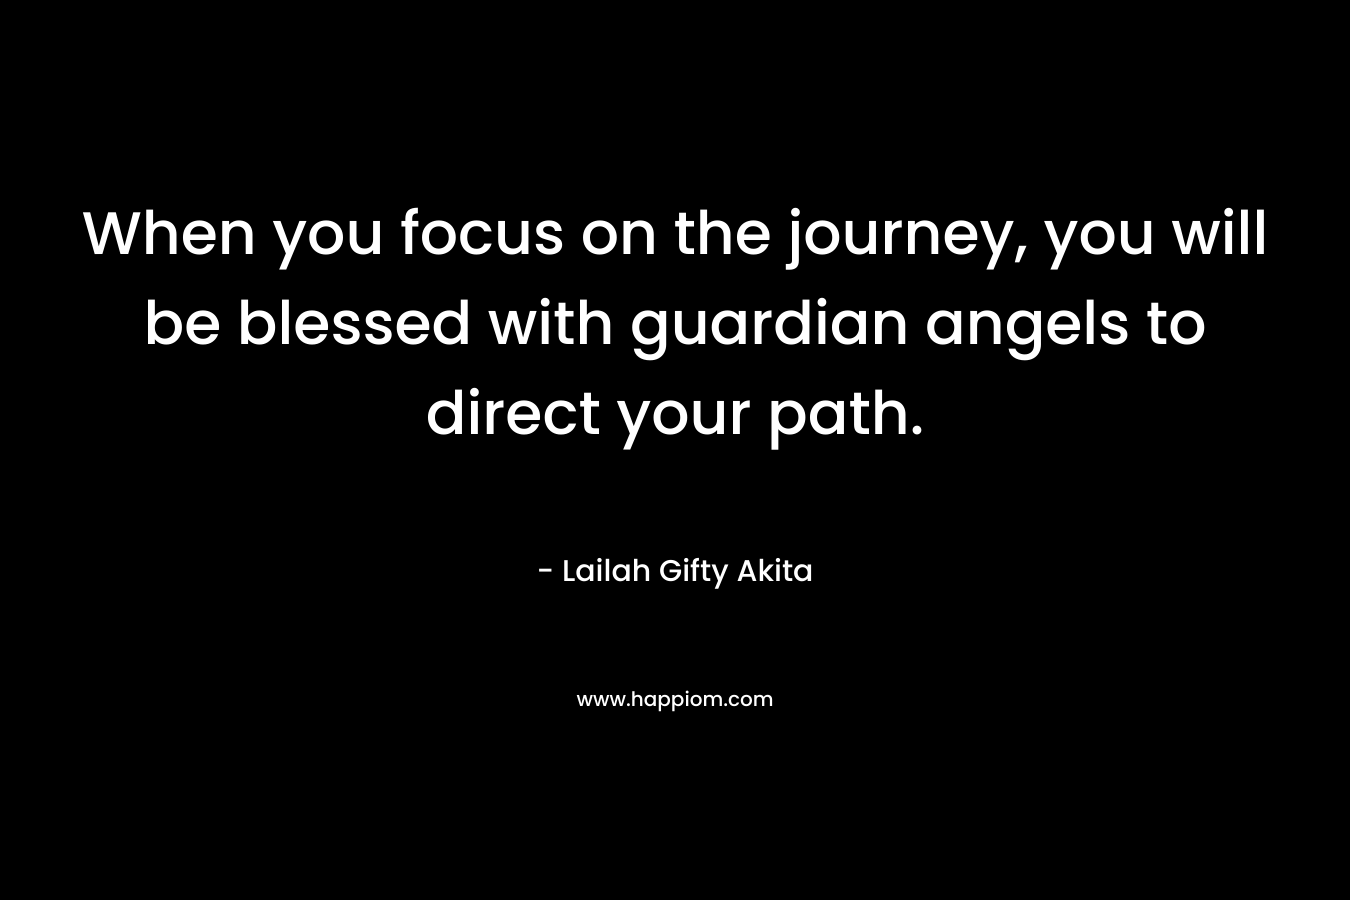 When you focus on the journey, you will be blessed with guardian angels to direct your path.